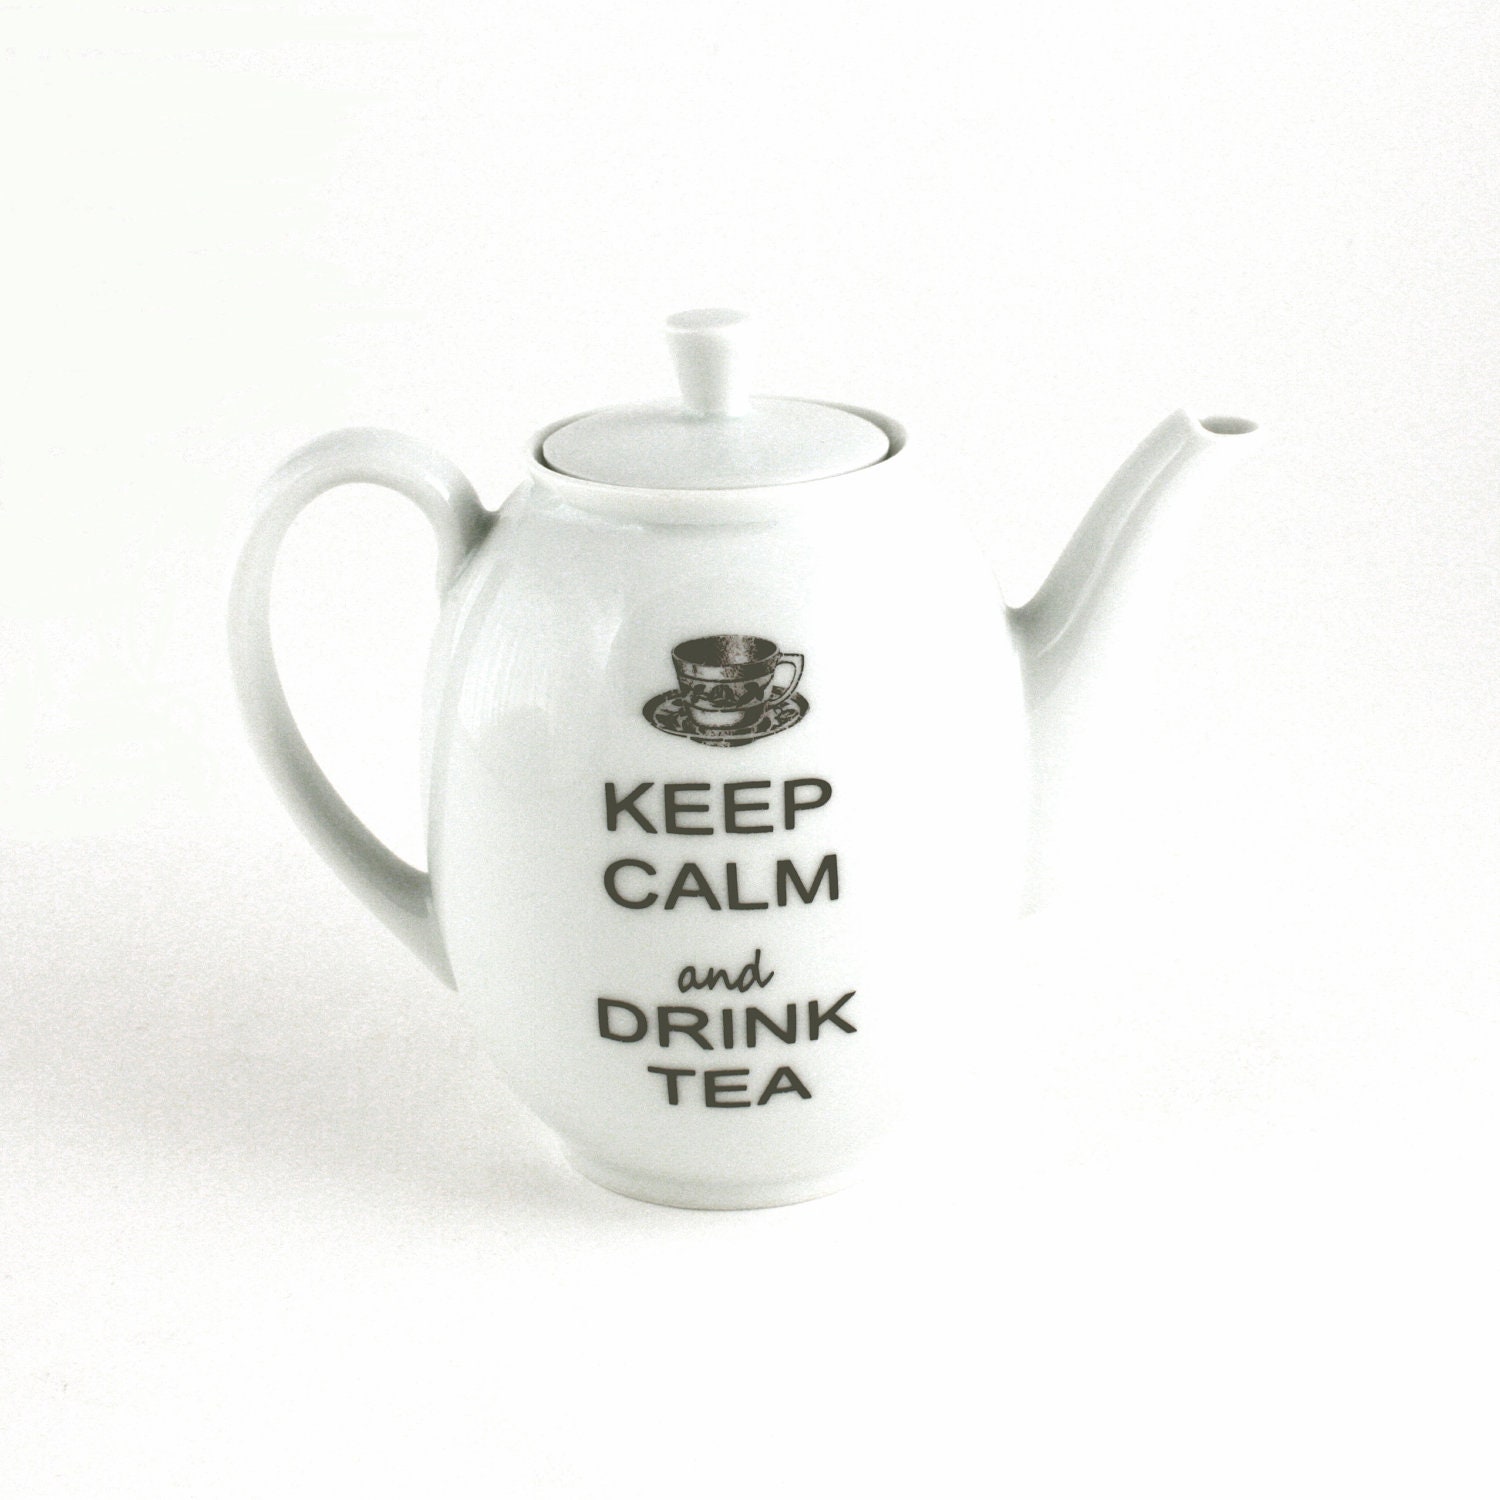 SALE Keep Calm and Drink Tea Altered Vintage Small Teapot Porcelain White Brown Unique Upcycled - MoreThanPorcelain